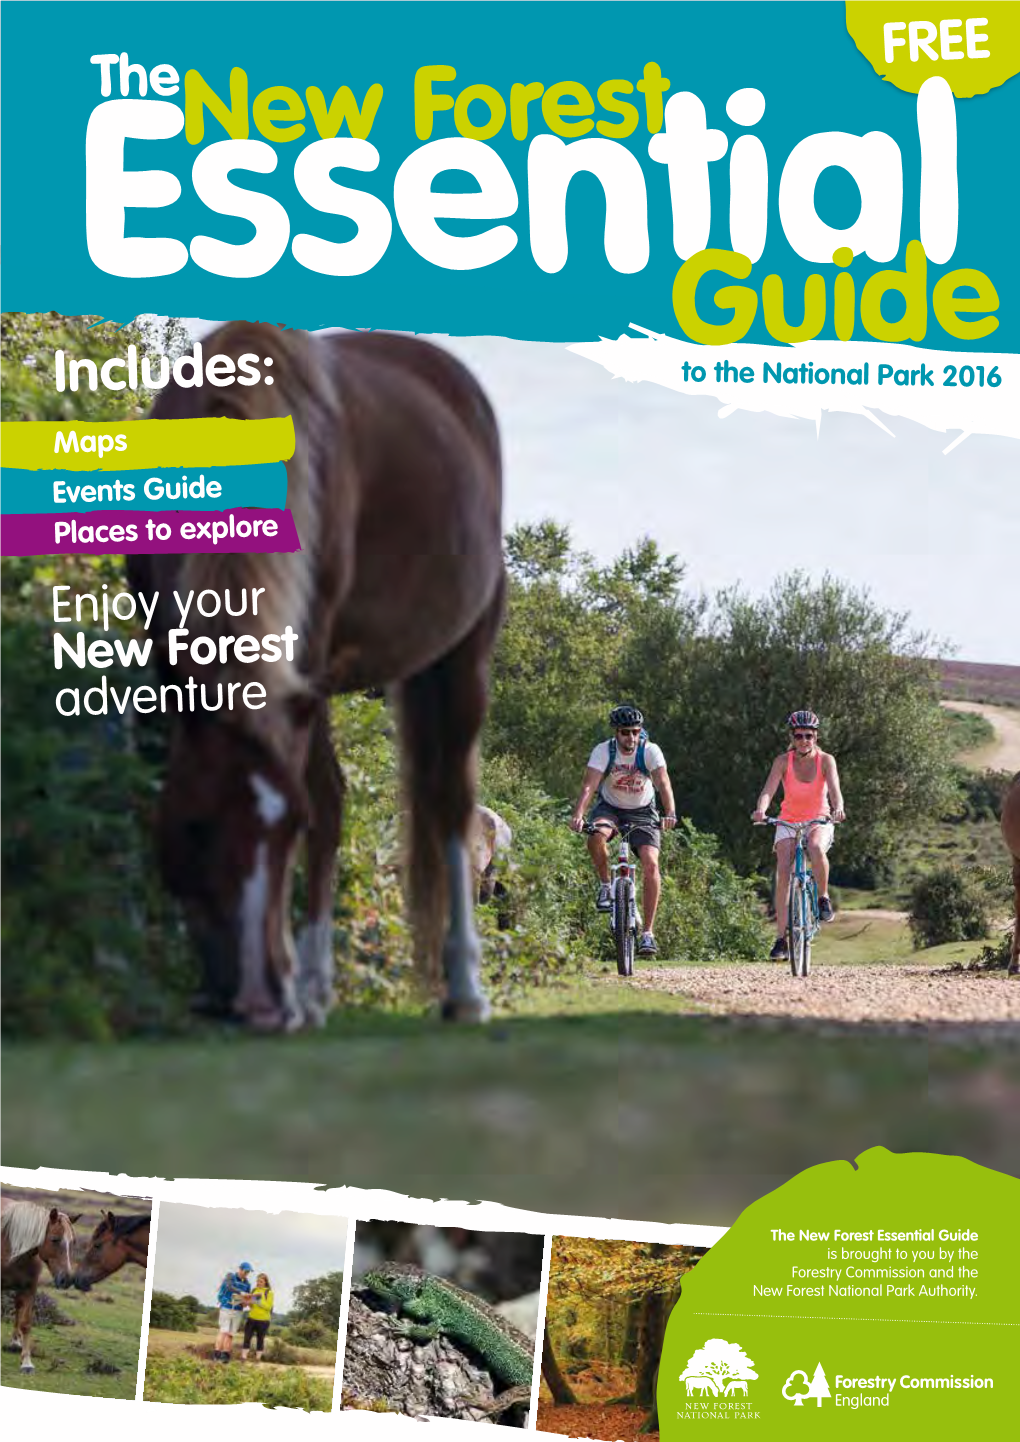 New Forest Essentialguide Includes: to the National Park 2016 Maps Events Guide Places to Explore Enjoy Your New Forest Adventure